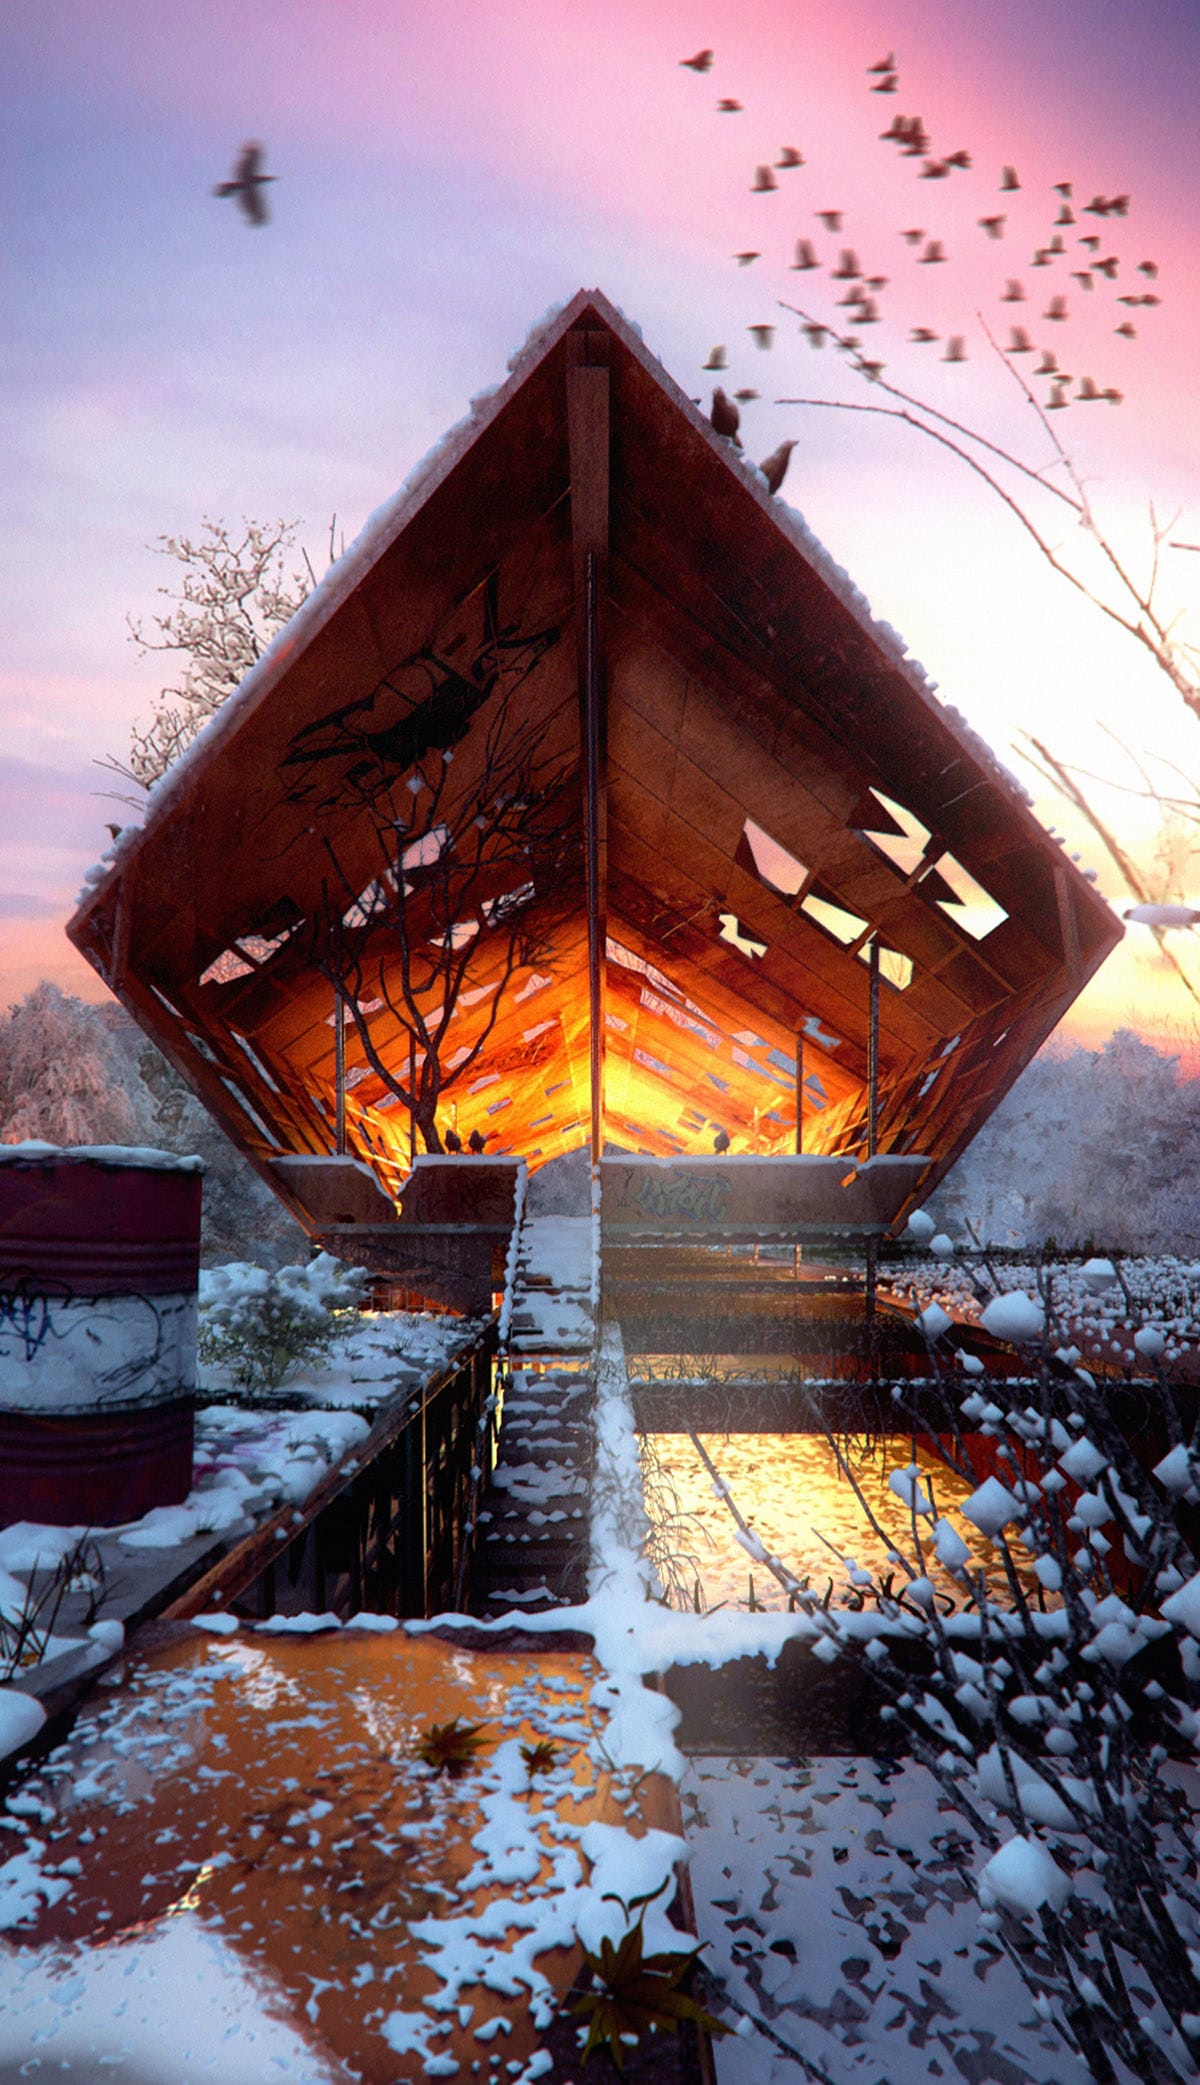 Render winner image for a contest of a bridge damaged at sunset with snow